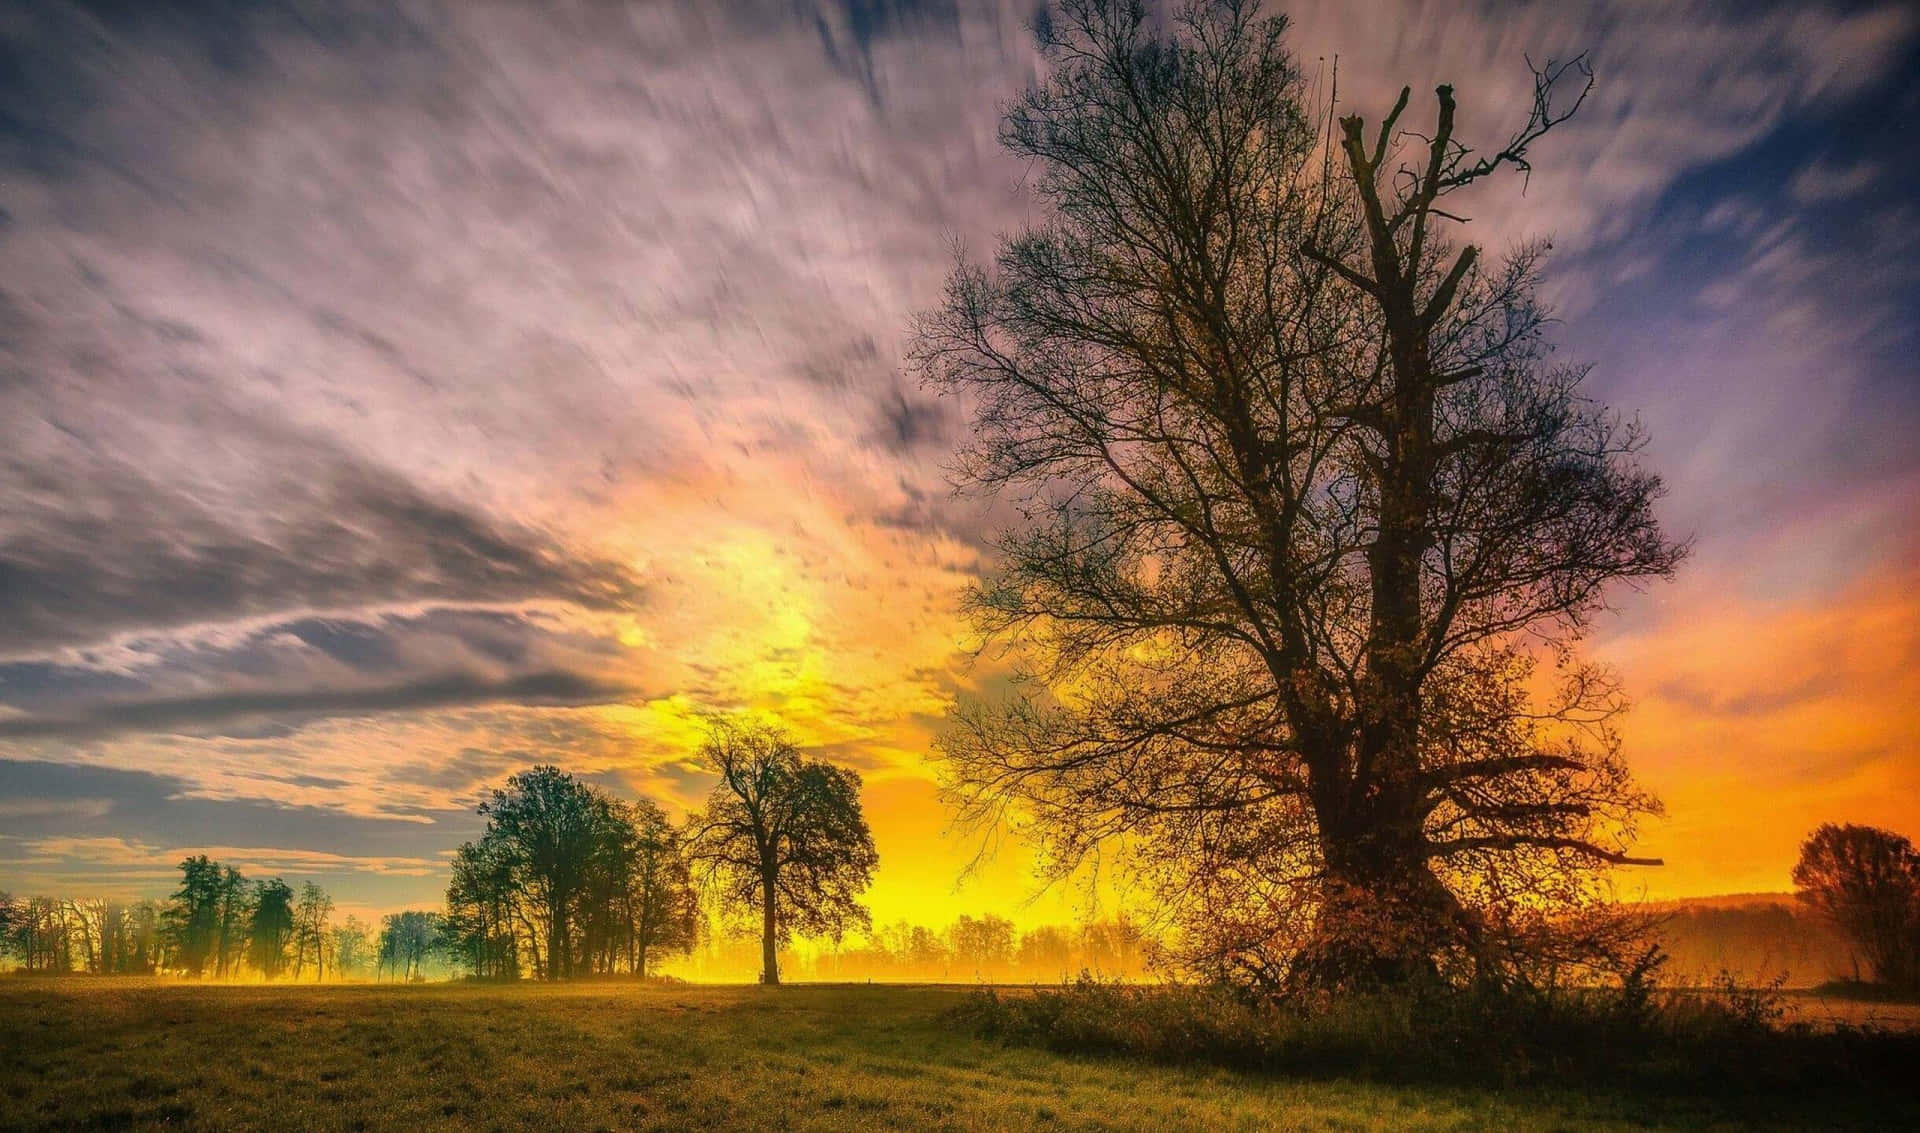 a tree in a field with a colorful sky